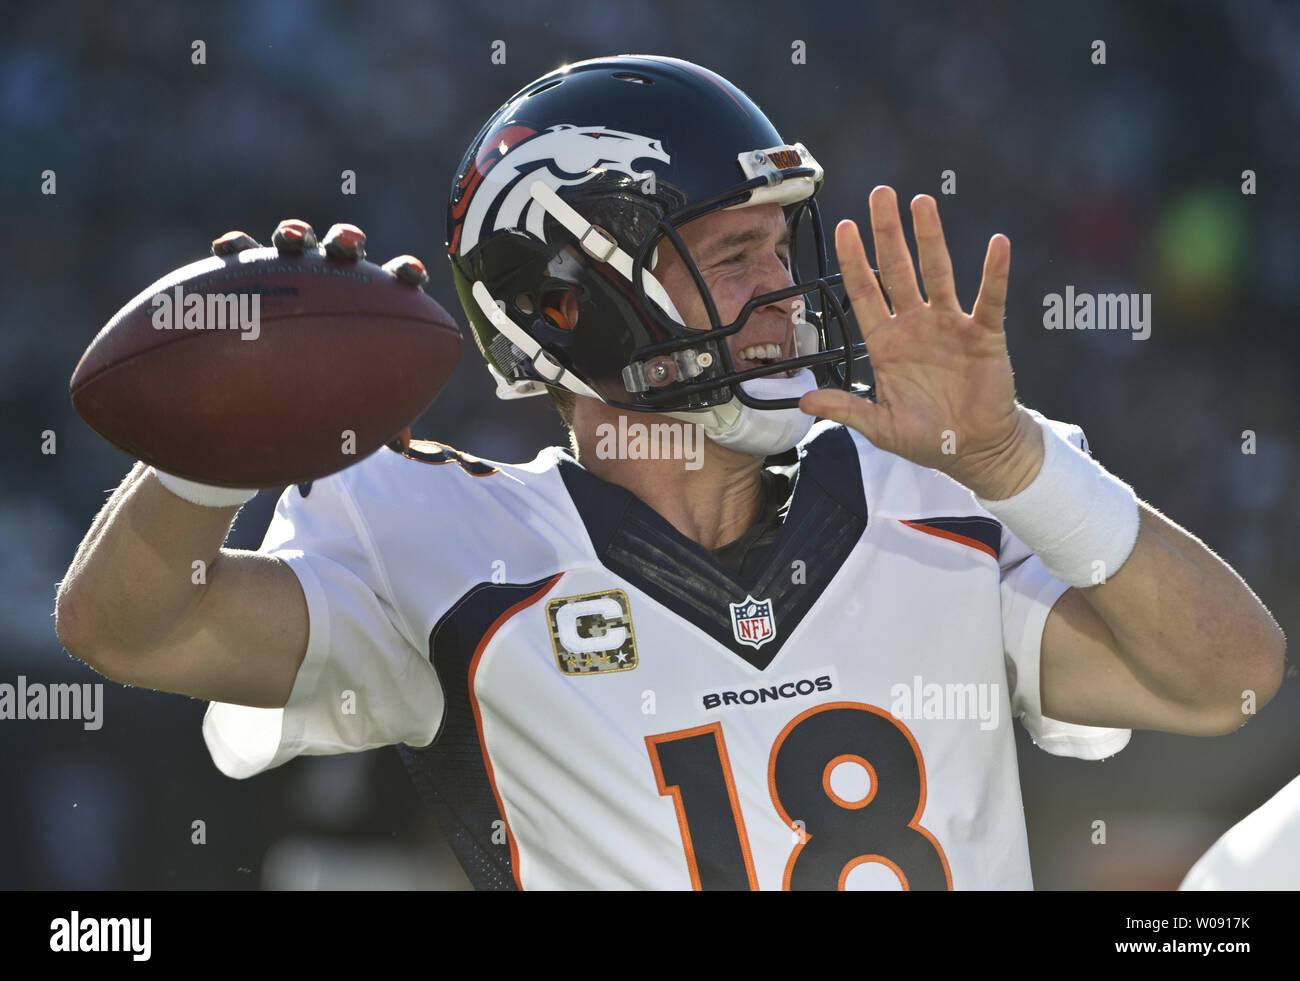 Denver Broncos Peyton Manning warms up for the third quarter against the Oakland Raiders at O.co Coliseum in Oakland, California on November 9, 2014. The Broncos defeated the winless Raiders 41-17.     UPI/Terry Schmitt Stock Photo